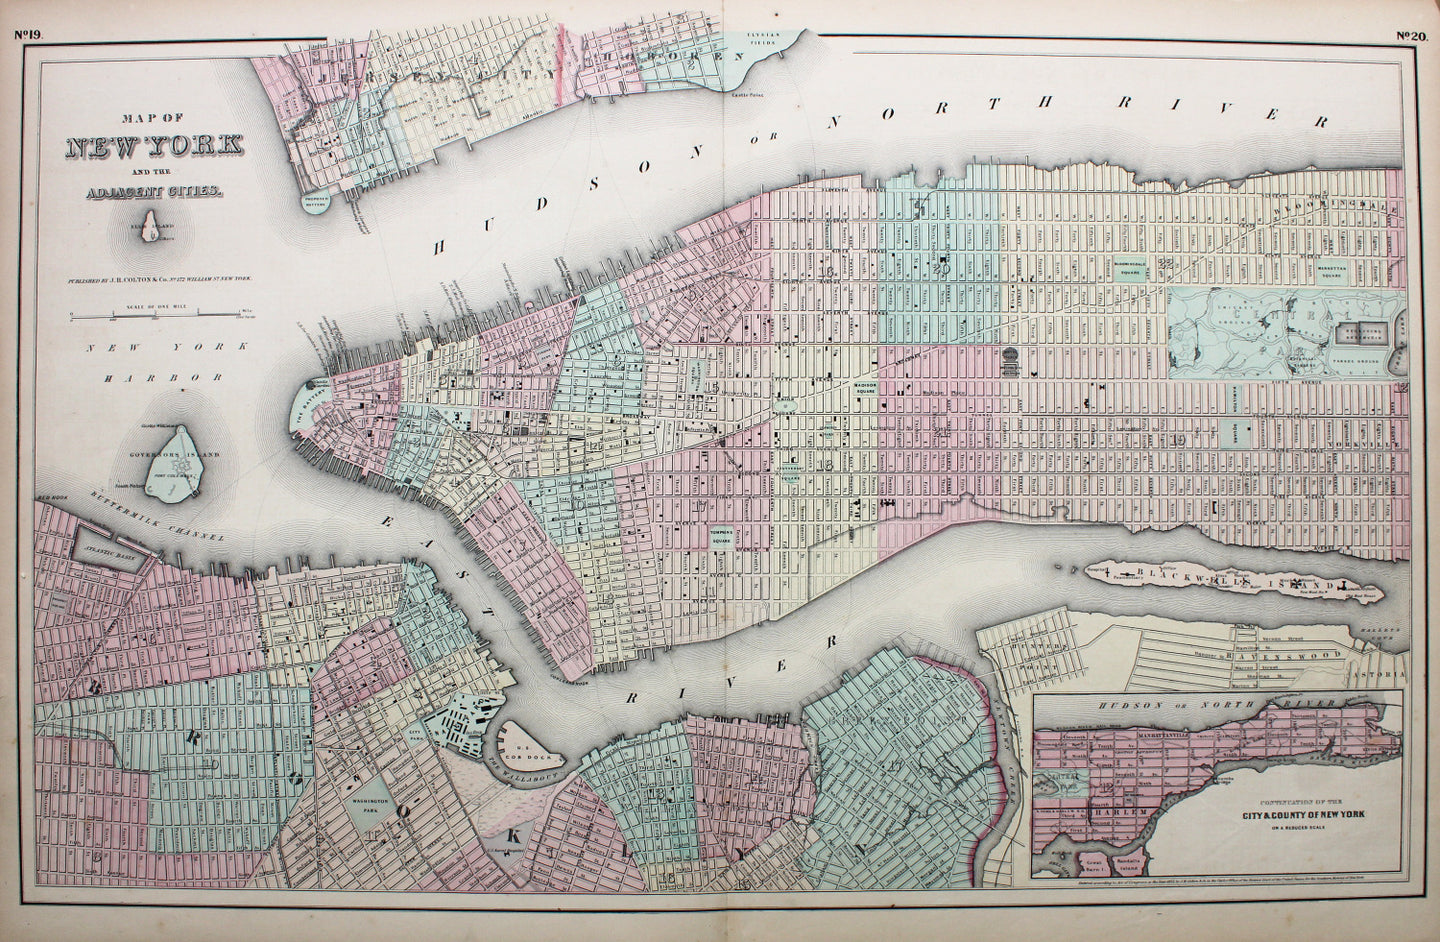 Antique-Hand-Colored-Map-Map-of-New-York-****-New-York-City--1858-Colton-Maps-Of-Antiquity